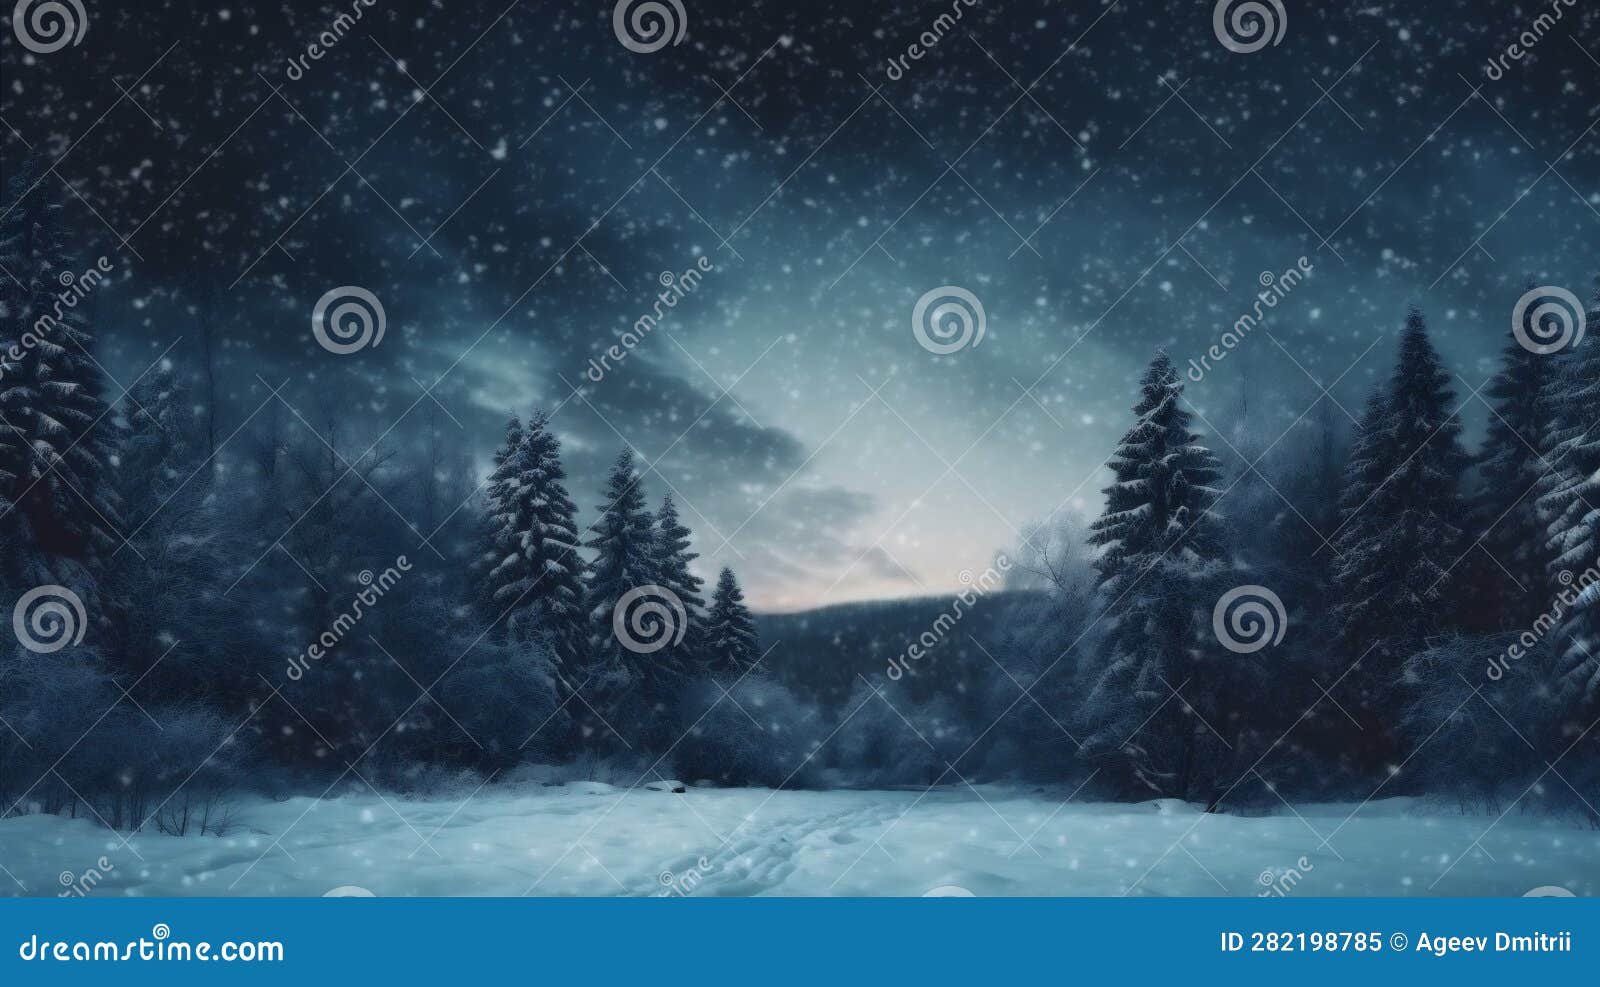 Background Night Fir Sky Tree Year Holiday Snow White New Winter ...